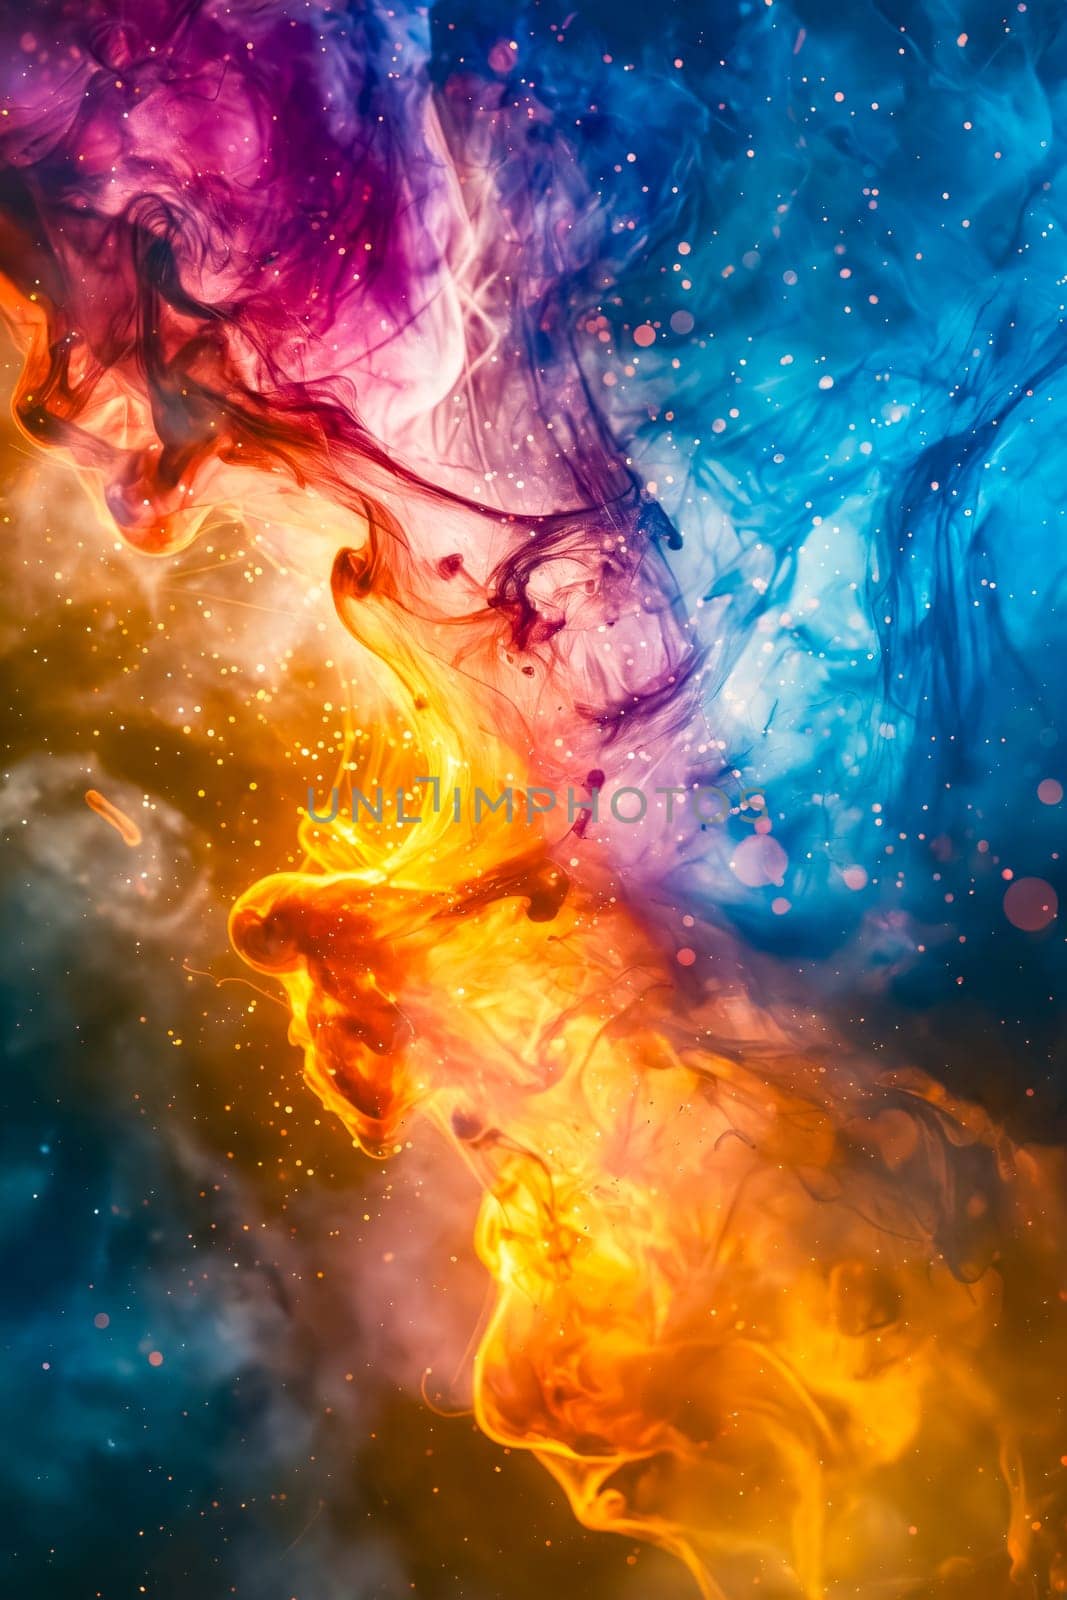 A colorful painting of a fire with orange and blue flames. The painting is abstract and has a dreamy, ethereal quality to it. Generative AI